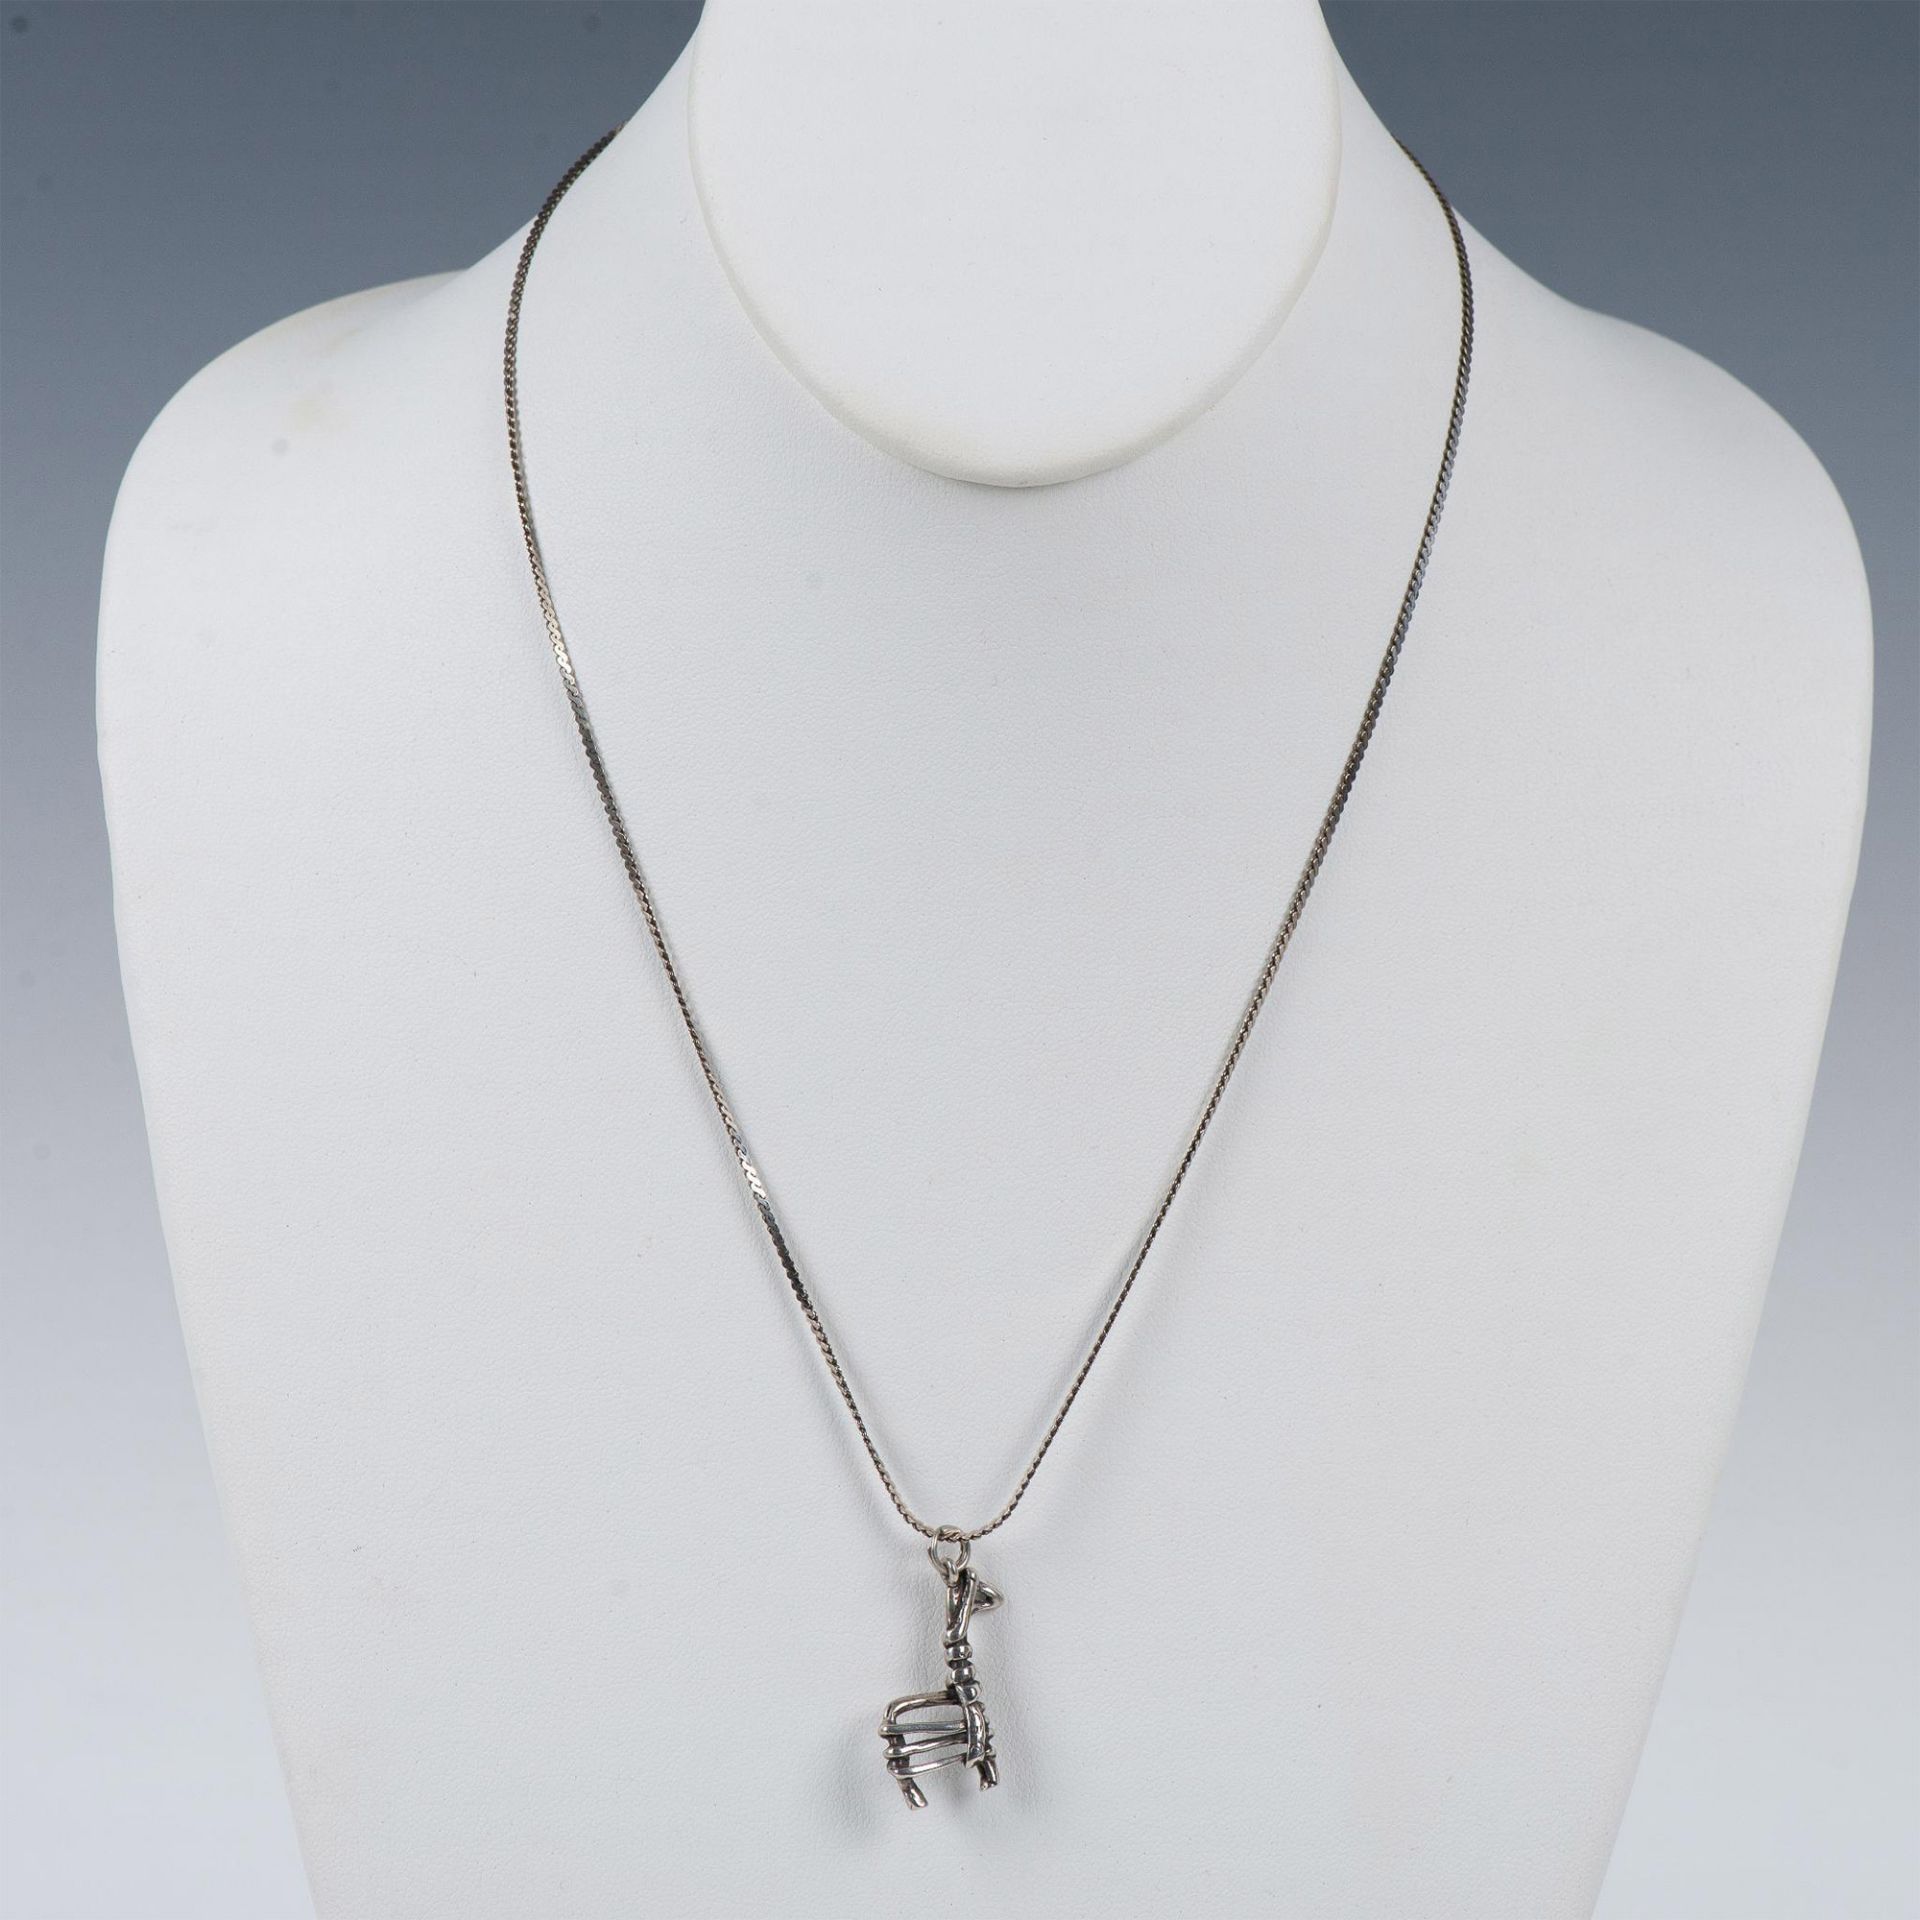 Silver Native American Stick Figure Horse Necklace - Image 3 of 7